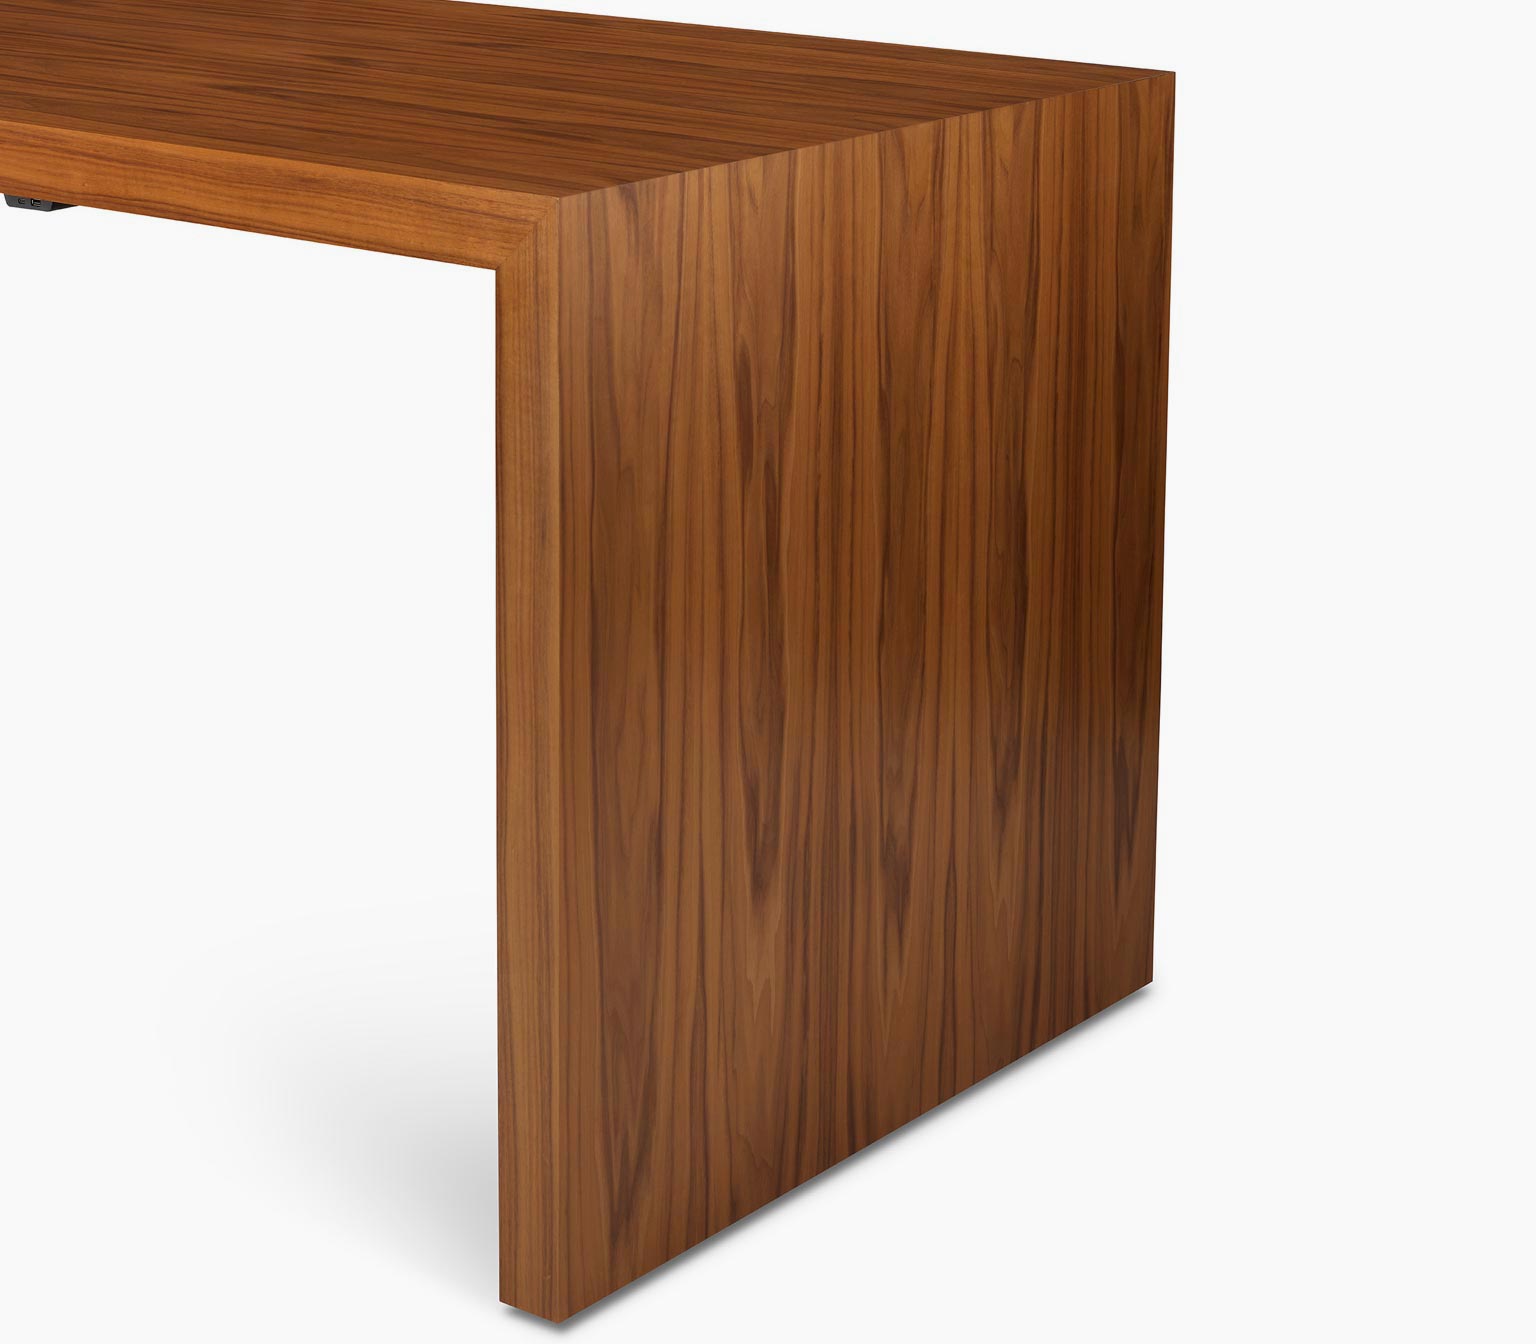 Edge detail view of a bar-height JD Waterfall Table in walnut